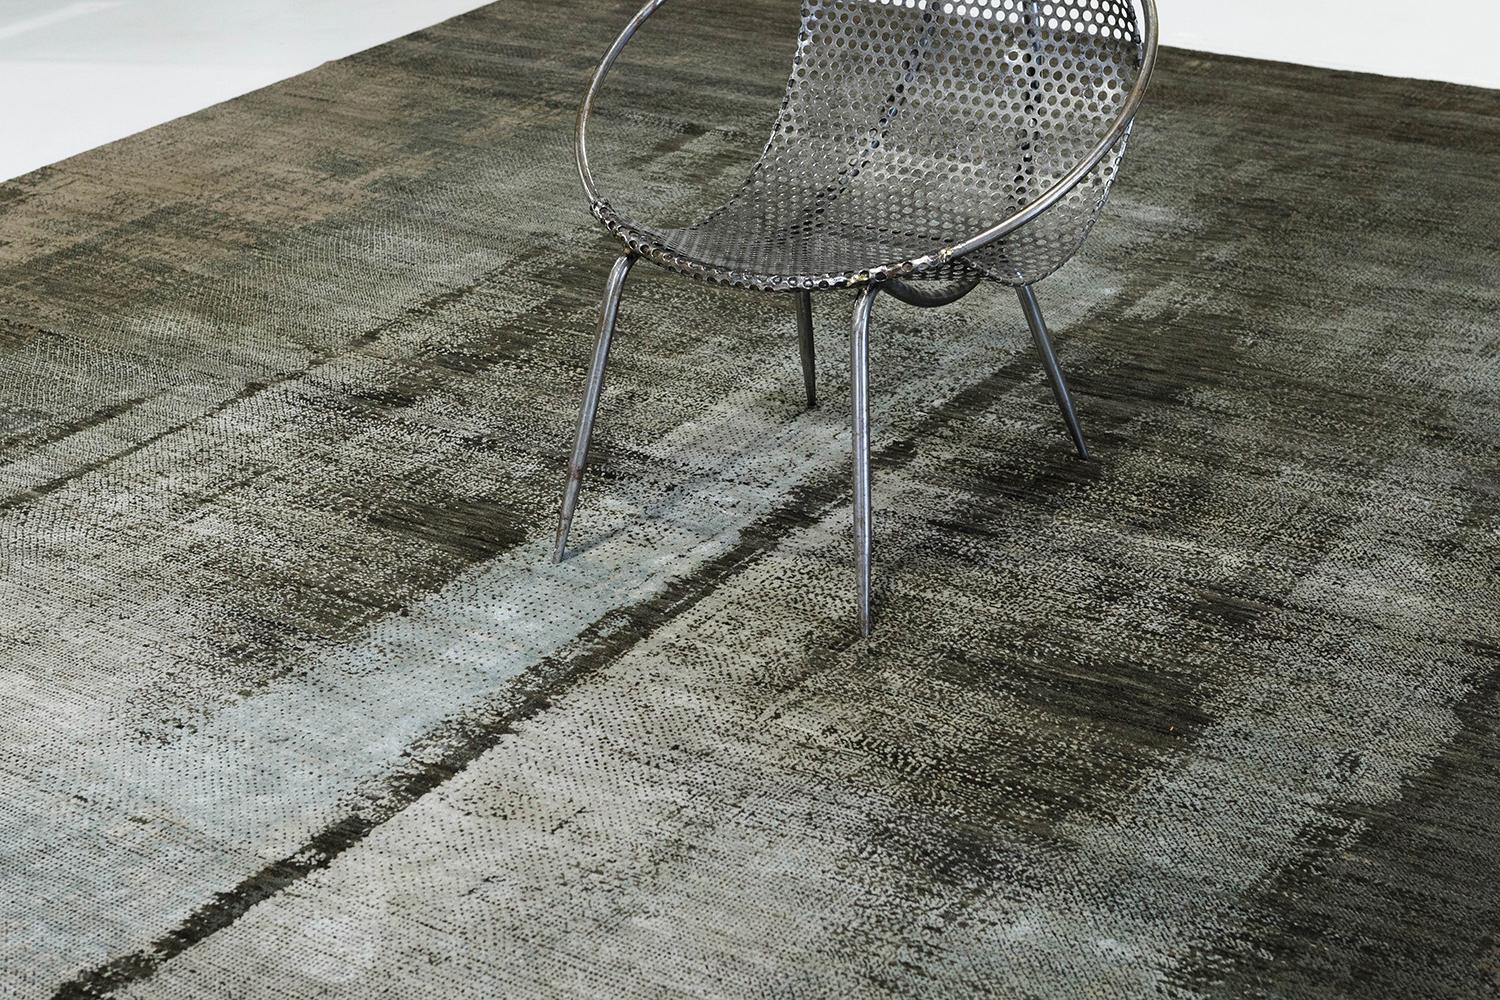 'Cascata' is the perfect contemporary piece weaving together both wool and silk. The cohesive colors of gray, coffee, and ice blue in addition to the rug's design that is made to look textured sure leaves lasting impressions.